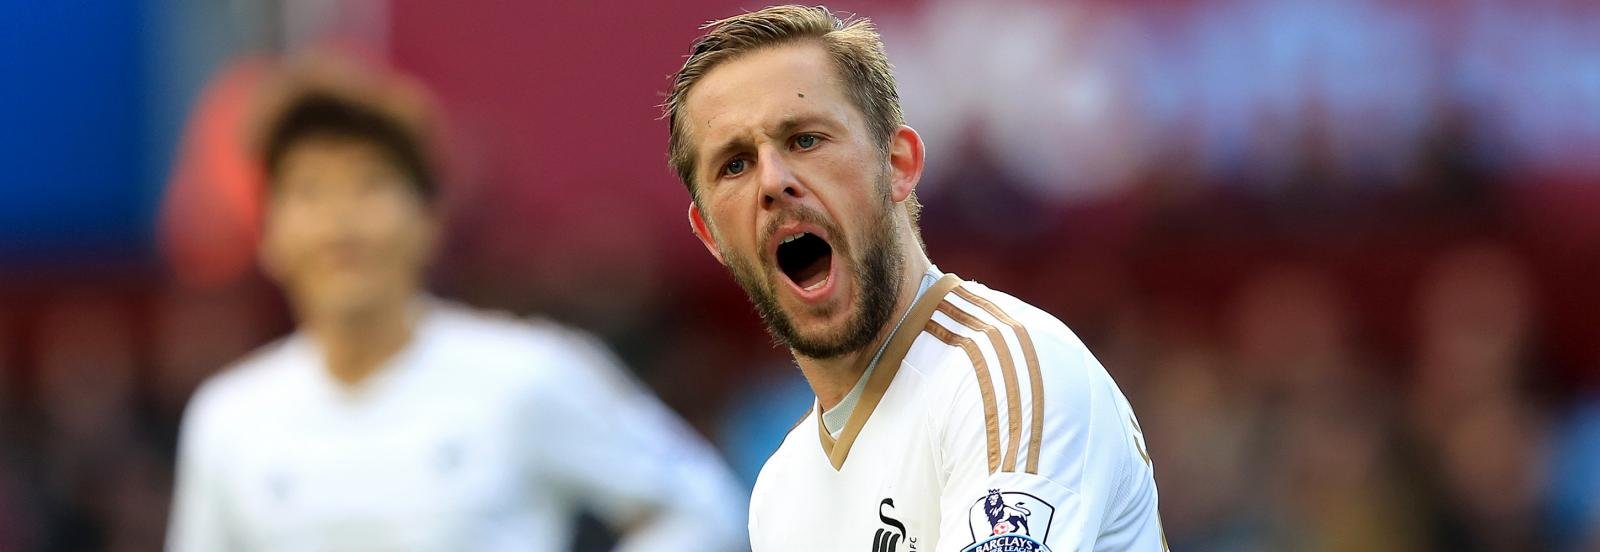 Swansea City midfielder Gylfi Sigurdsson signs new four-year deal with the club